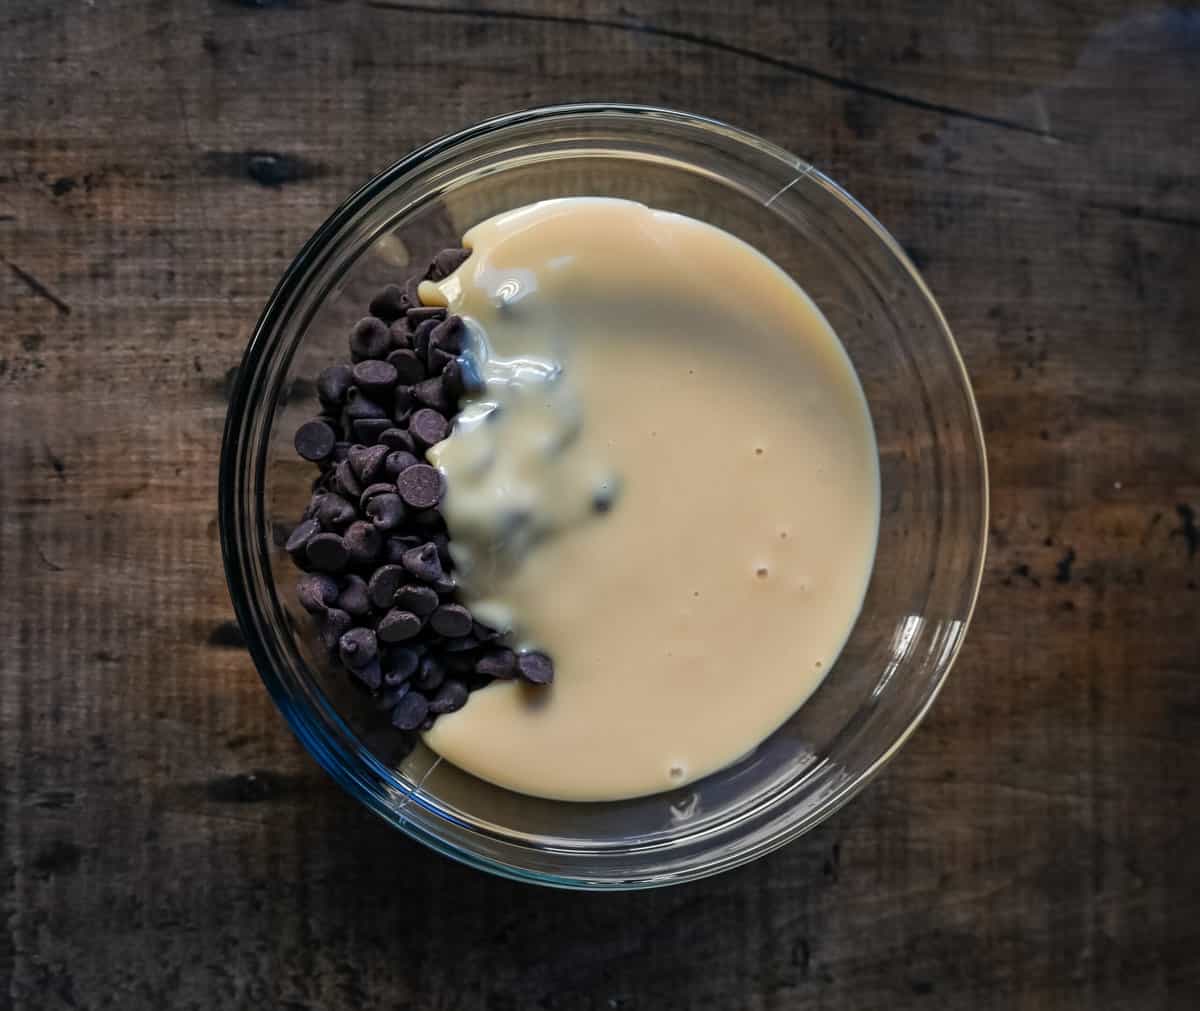 Mixing sweetened condensed milk and chocolate together in microwave safe bowl.